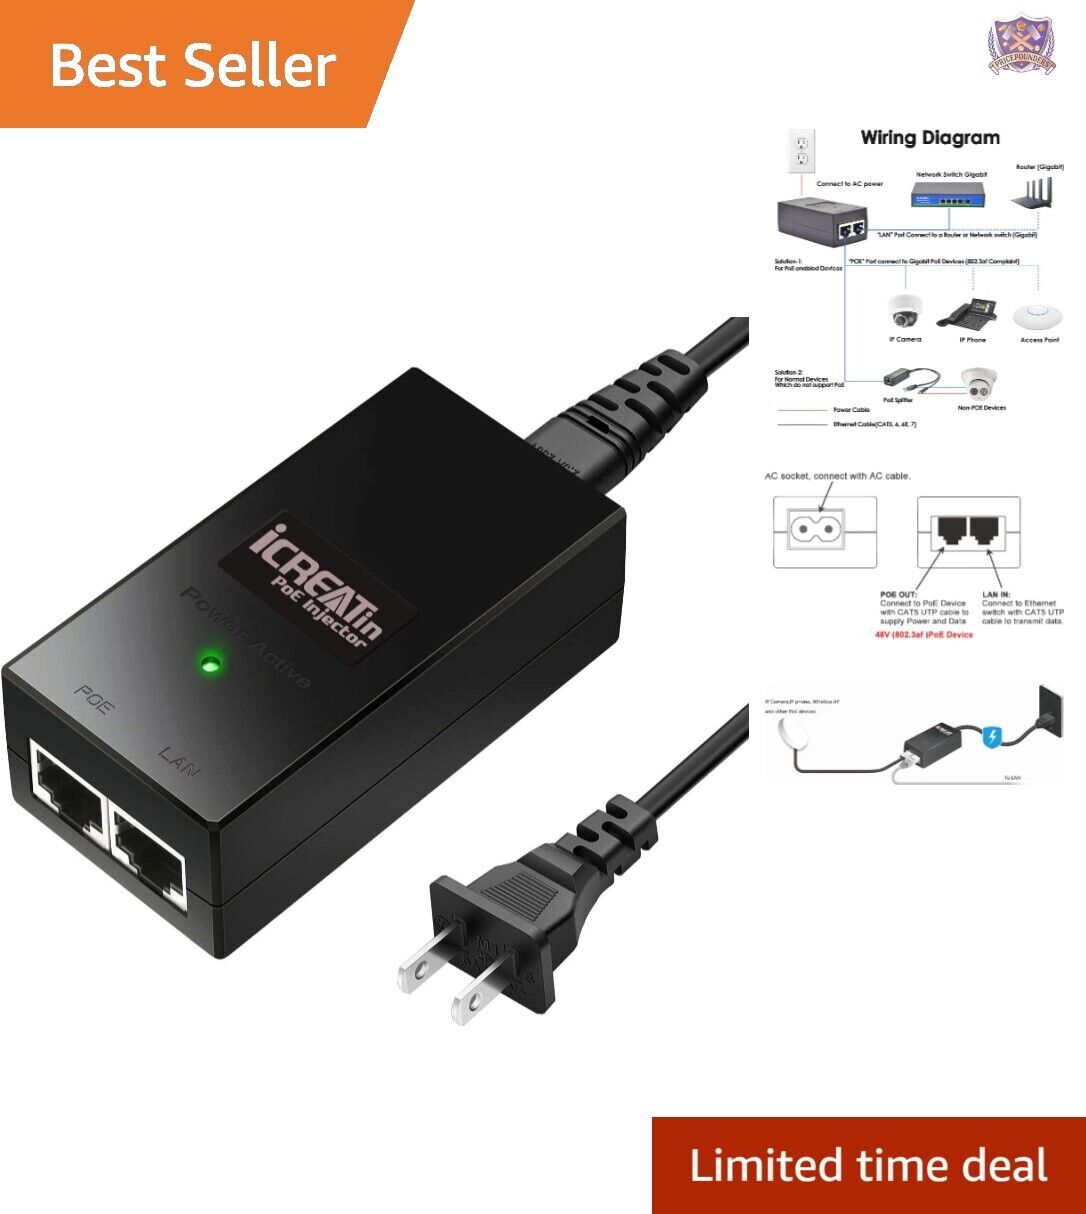 Easy Plug-and-Play POE Injector - 48V 15.4W Power Over Ethernet - 2Gbps Speed